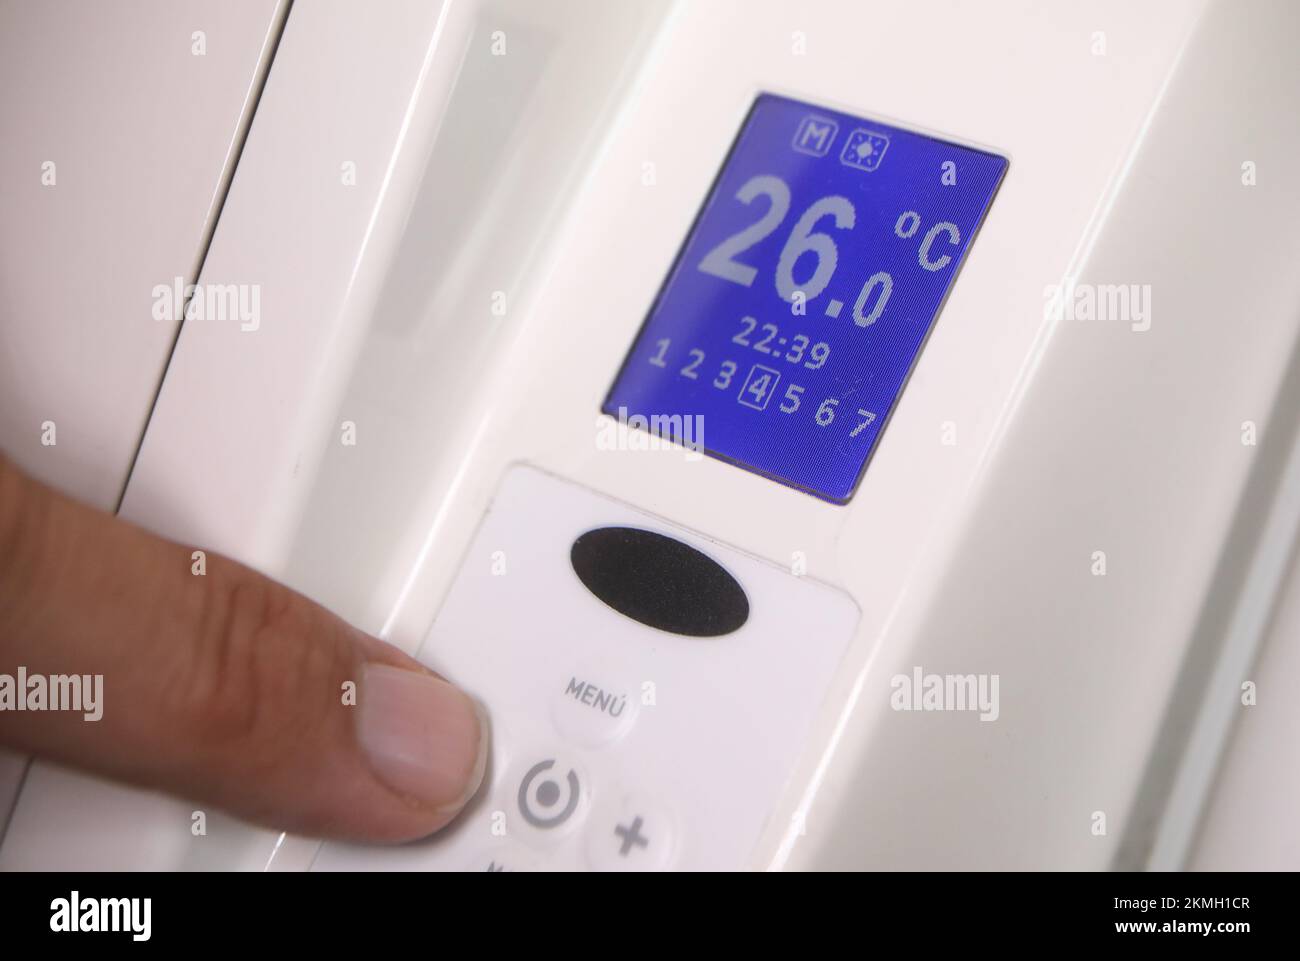 Turning temperatures down at home with the energy price hike, UK Stock Photo